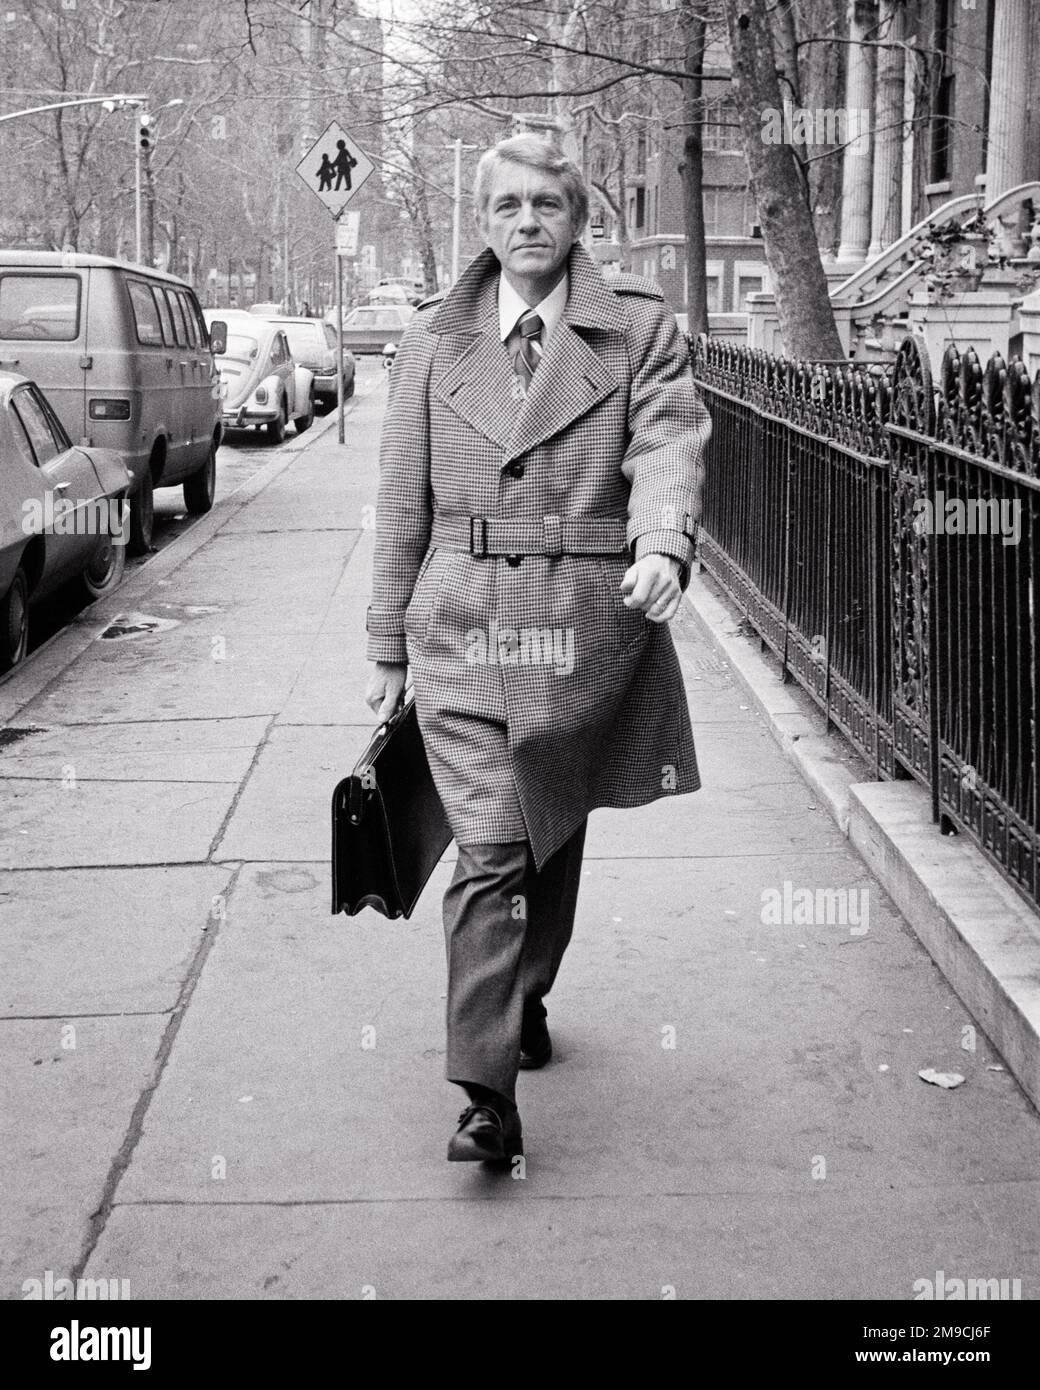 1970s UNSMILING MIDDLE-AGED MAN BUSINESSMAN SALESMAN WEARING BELTED WOOL COAT WALKING DOWN CITY STREET CARRYING BRIEFCASE - s20898 HAR001 HARS FACIAL STYLE WORRY LIFESTYLE SATISFACTION MOODY WOOL COPY SPACE FULL-LENGTH PERSONS MALES CONFIDENCE EXPRESSIONS TROUBLED MIDDLE-AGED B&W CONCERNED SADNESS MIDDLE-AGED MAN EYE CONTACT SUIT AND TIE SELLING LEADERSHIP PRIDE OPPORTUNITY MOOD OCCUPATIONS GLUM DAPPER STYLISH BELTED DETERMINED LAPELS MISERABLE SALESMEN BLACK AND WHITE CAUCASIAN ETHNICITY HAR001 OLD FASHIONED UNSMILING Stock Photo